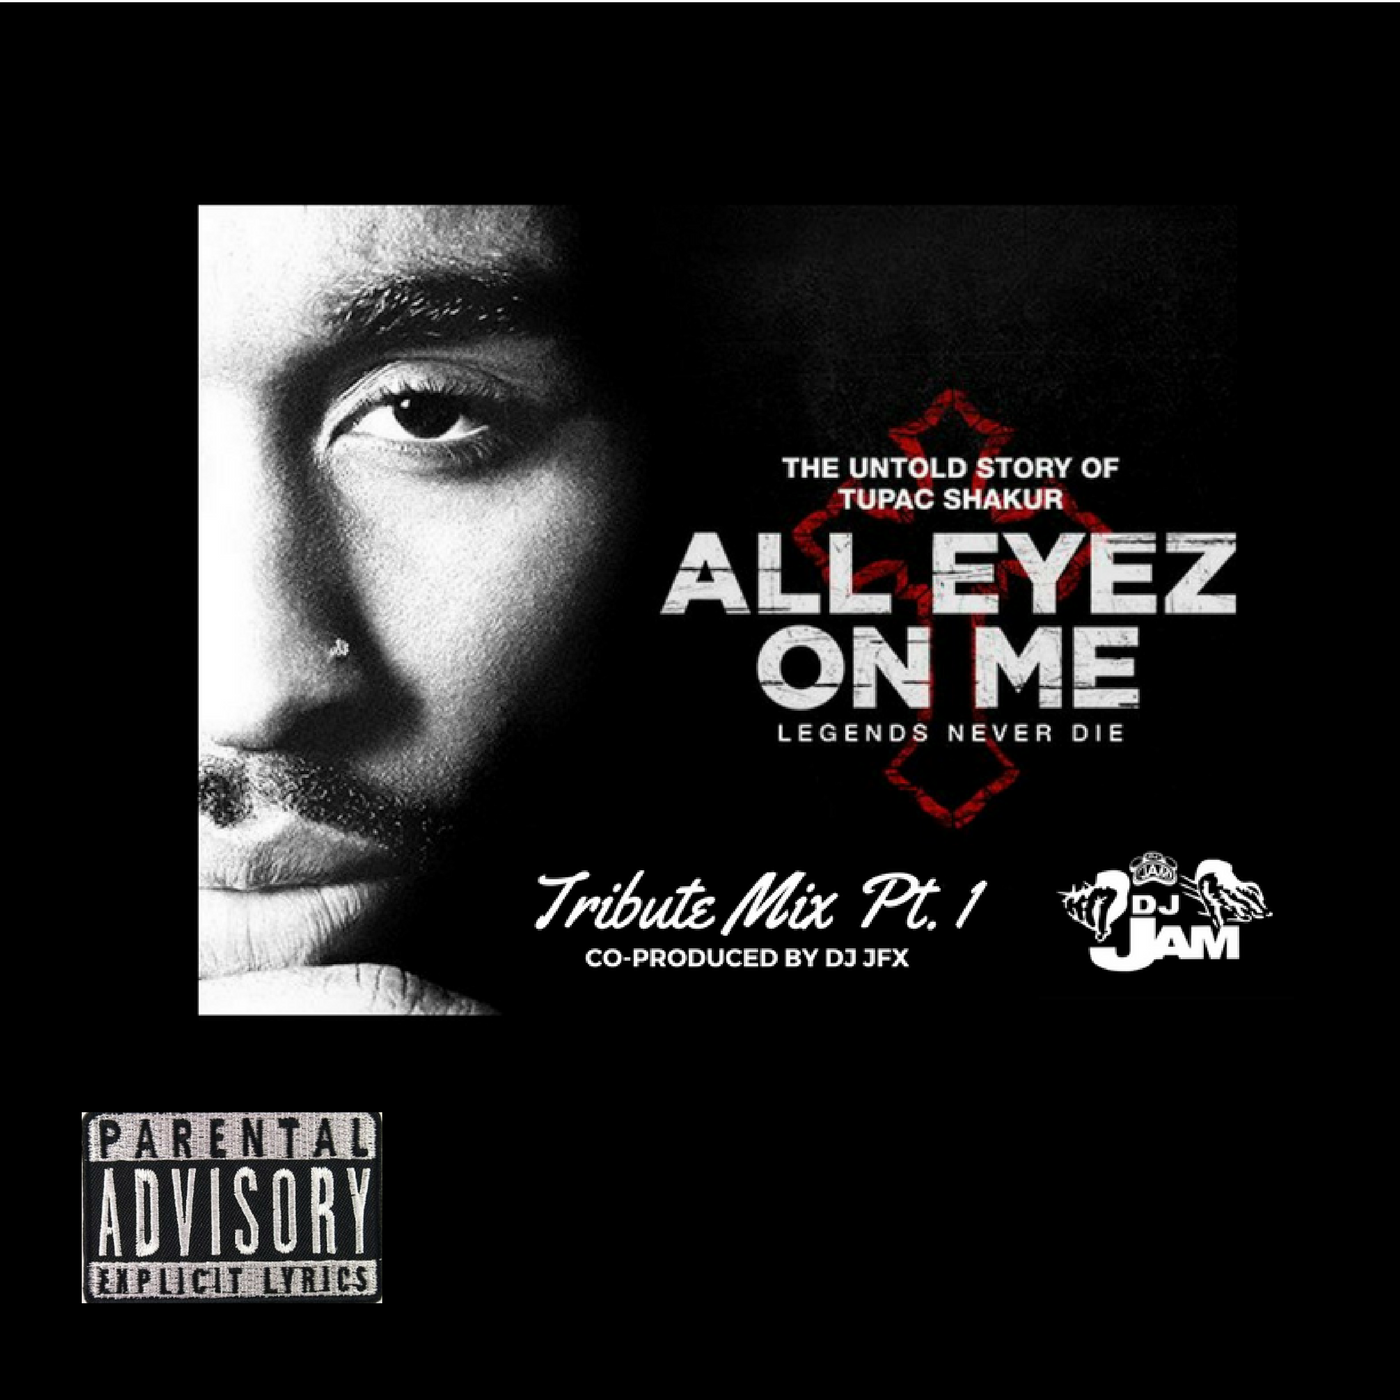 2Pac “All Eyez On Me” Tribute Mix PT. 1 Co produced by DJ JFX